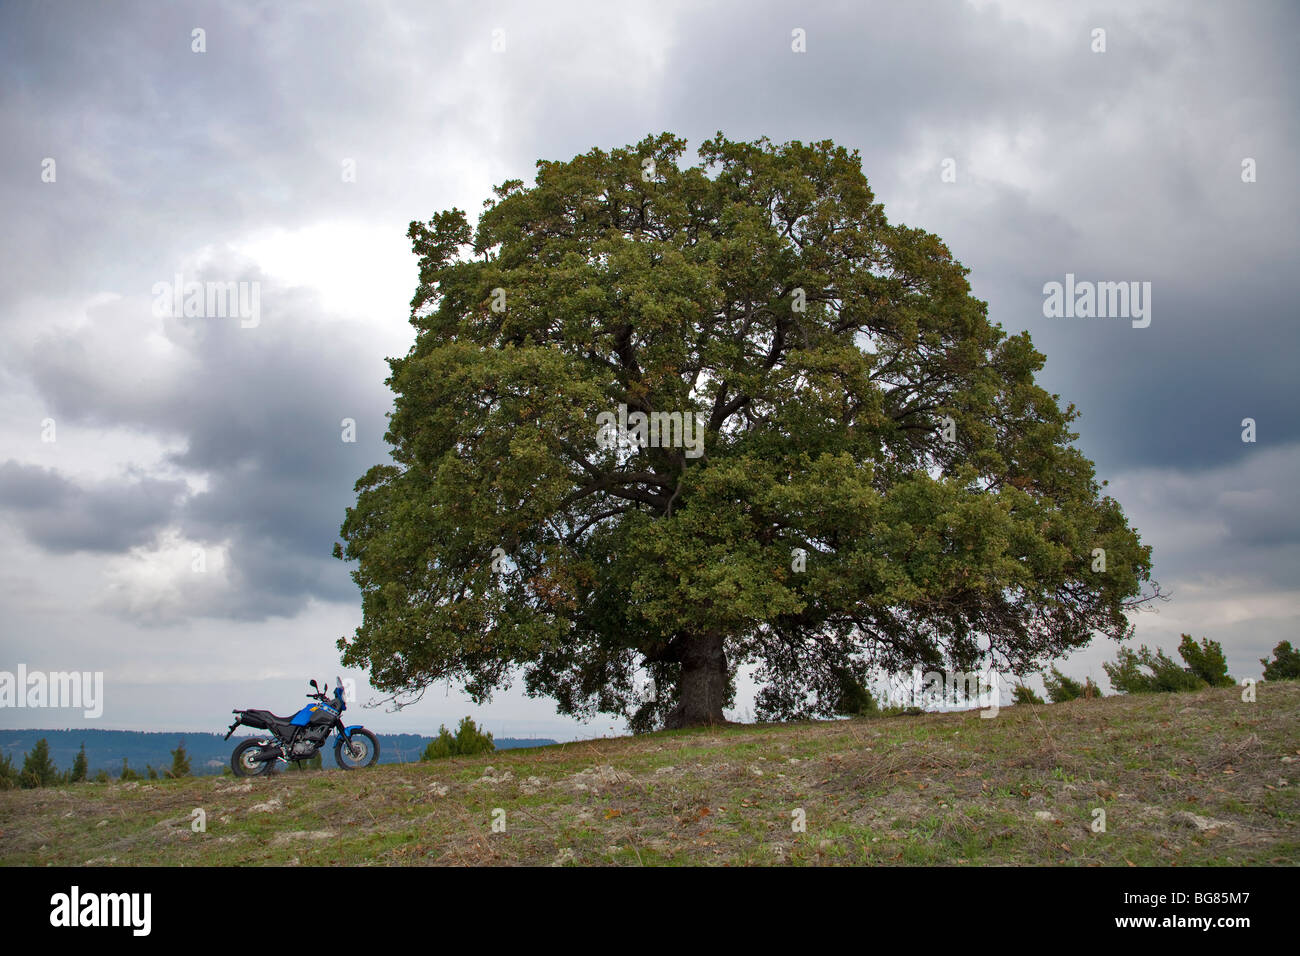 Oak tree at the top of hill at Kassandra,Chalkidiki,Greece.There is also a motor bike,a Yamaha Tenere nearby Stock Photo